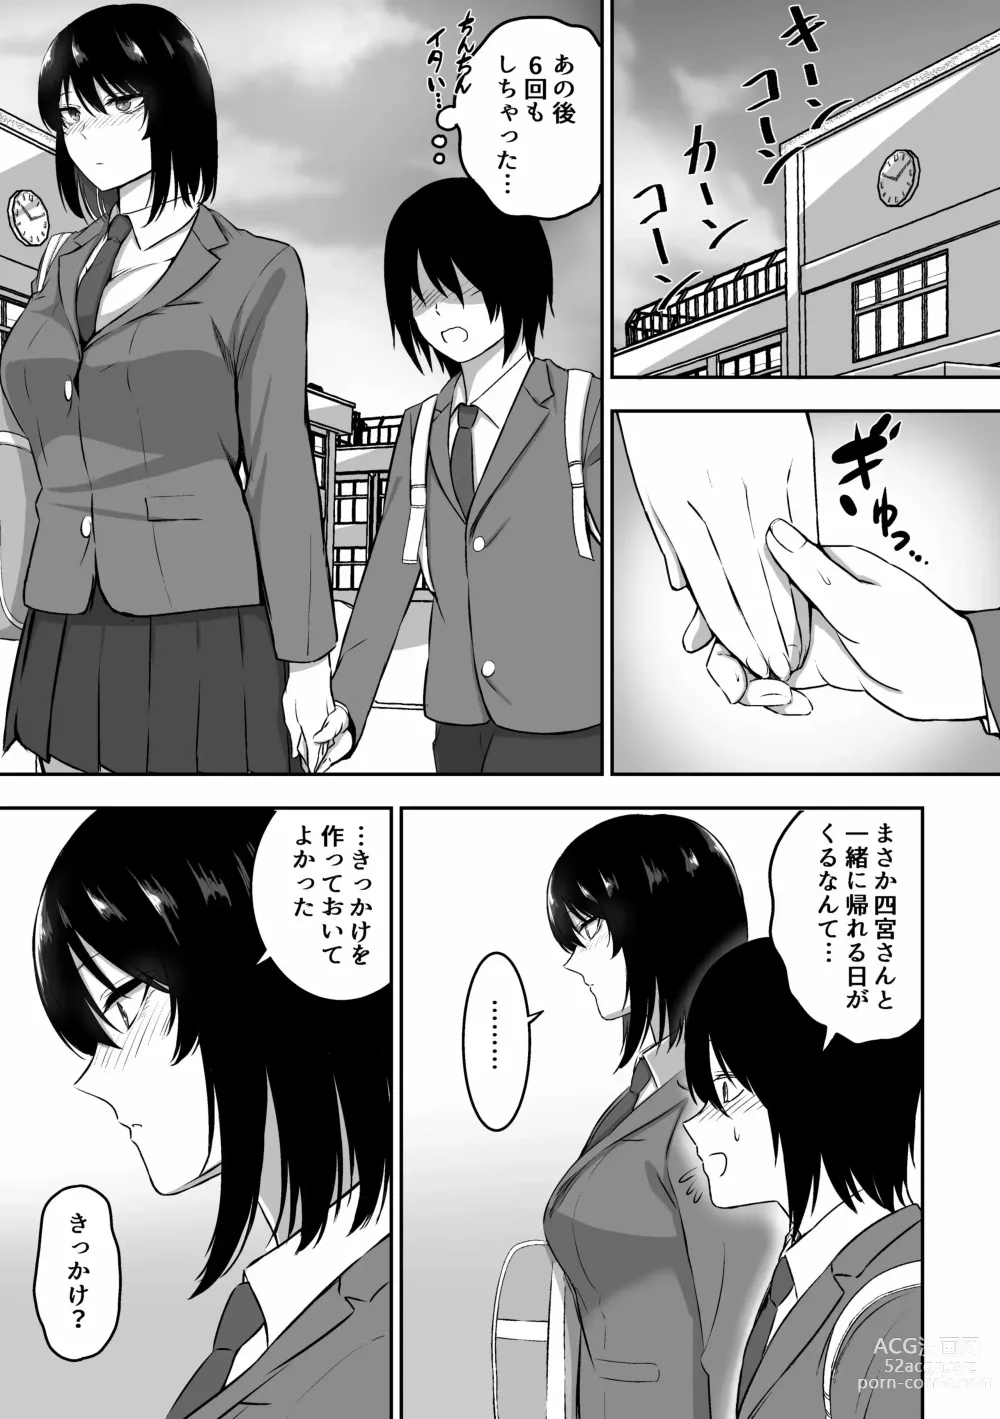 Page 154 of doujinshi 三食纳豆辣妹